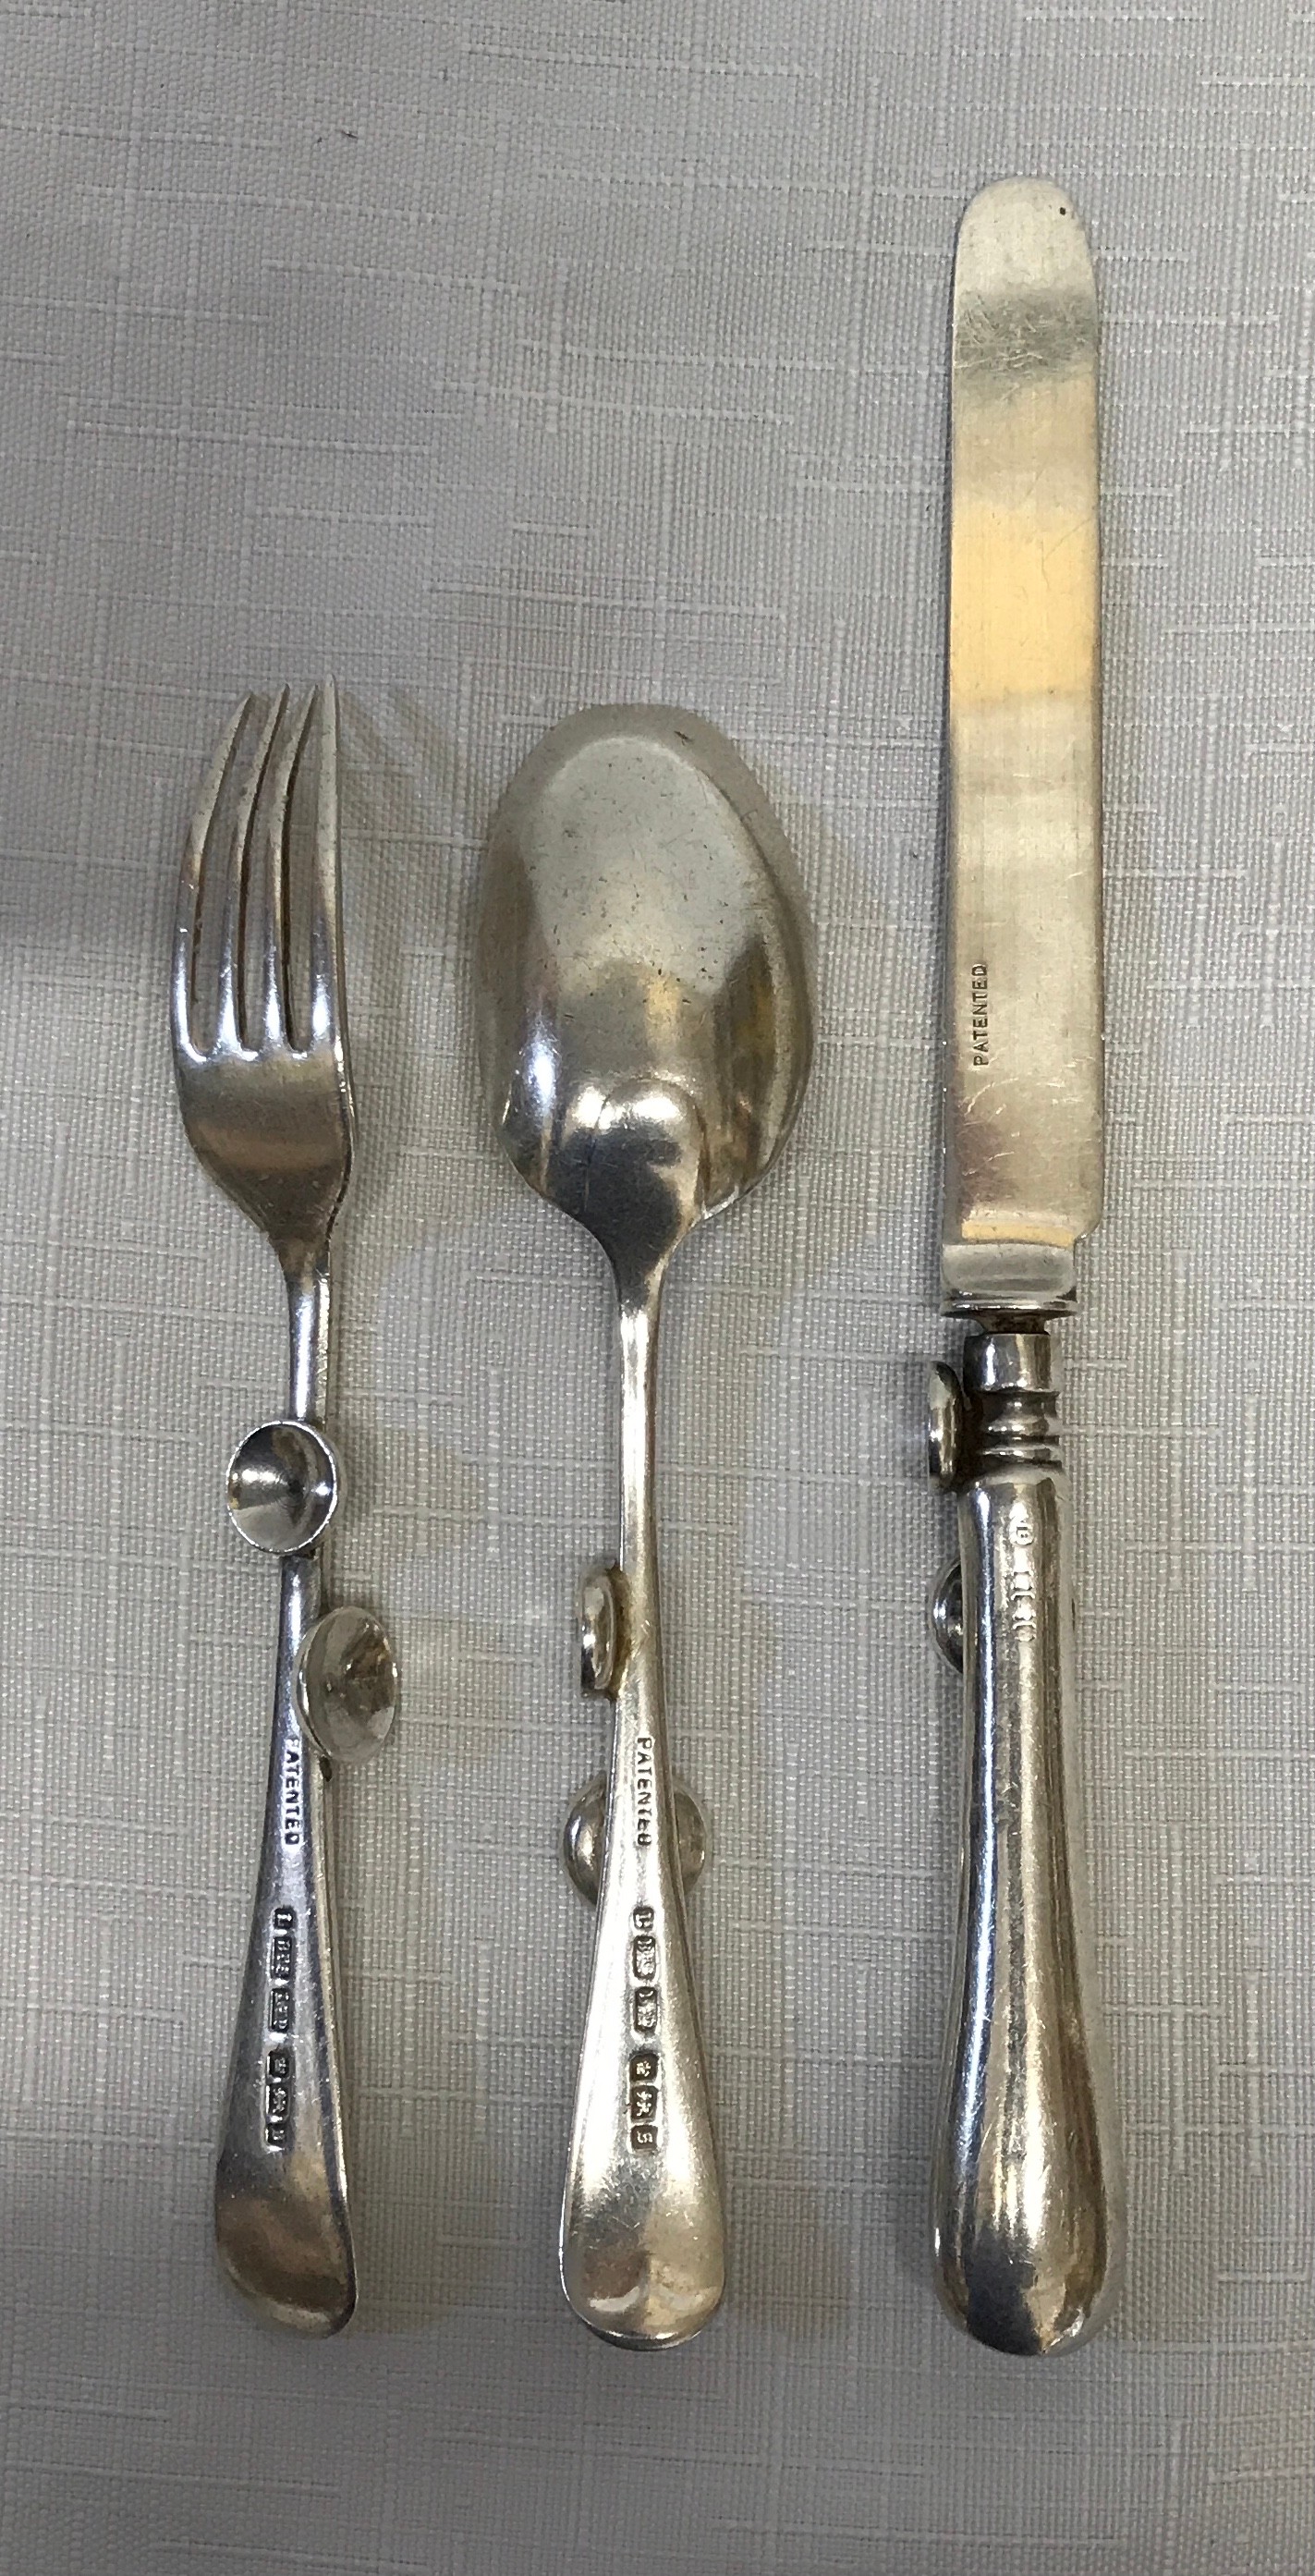 A Silver cutlery set, Sheffield 1910 L BRS Ltd with ergonomic design possibly for infants due to - Image 2 of 5